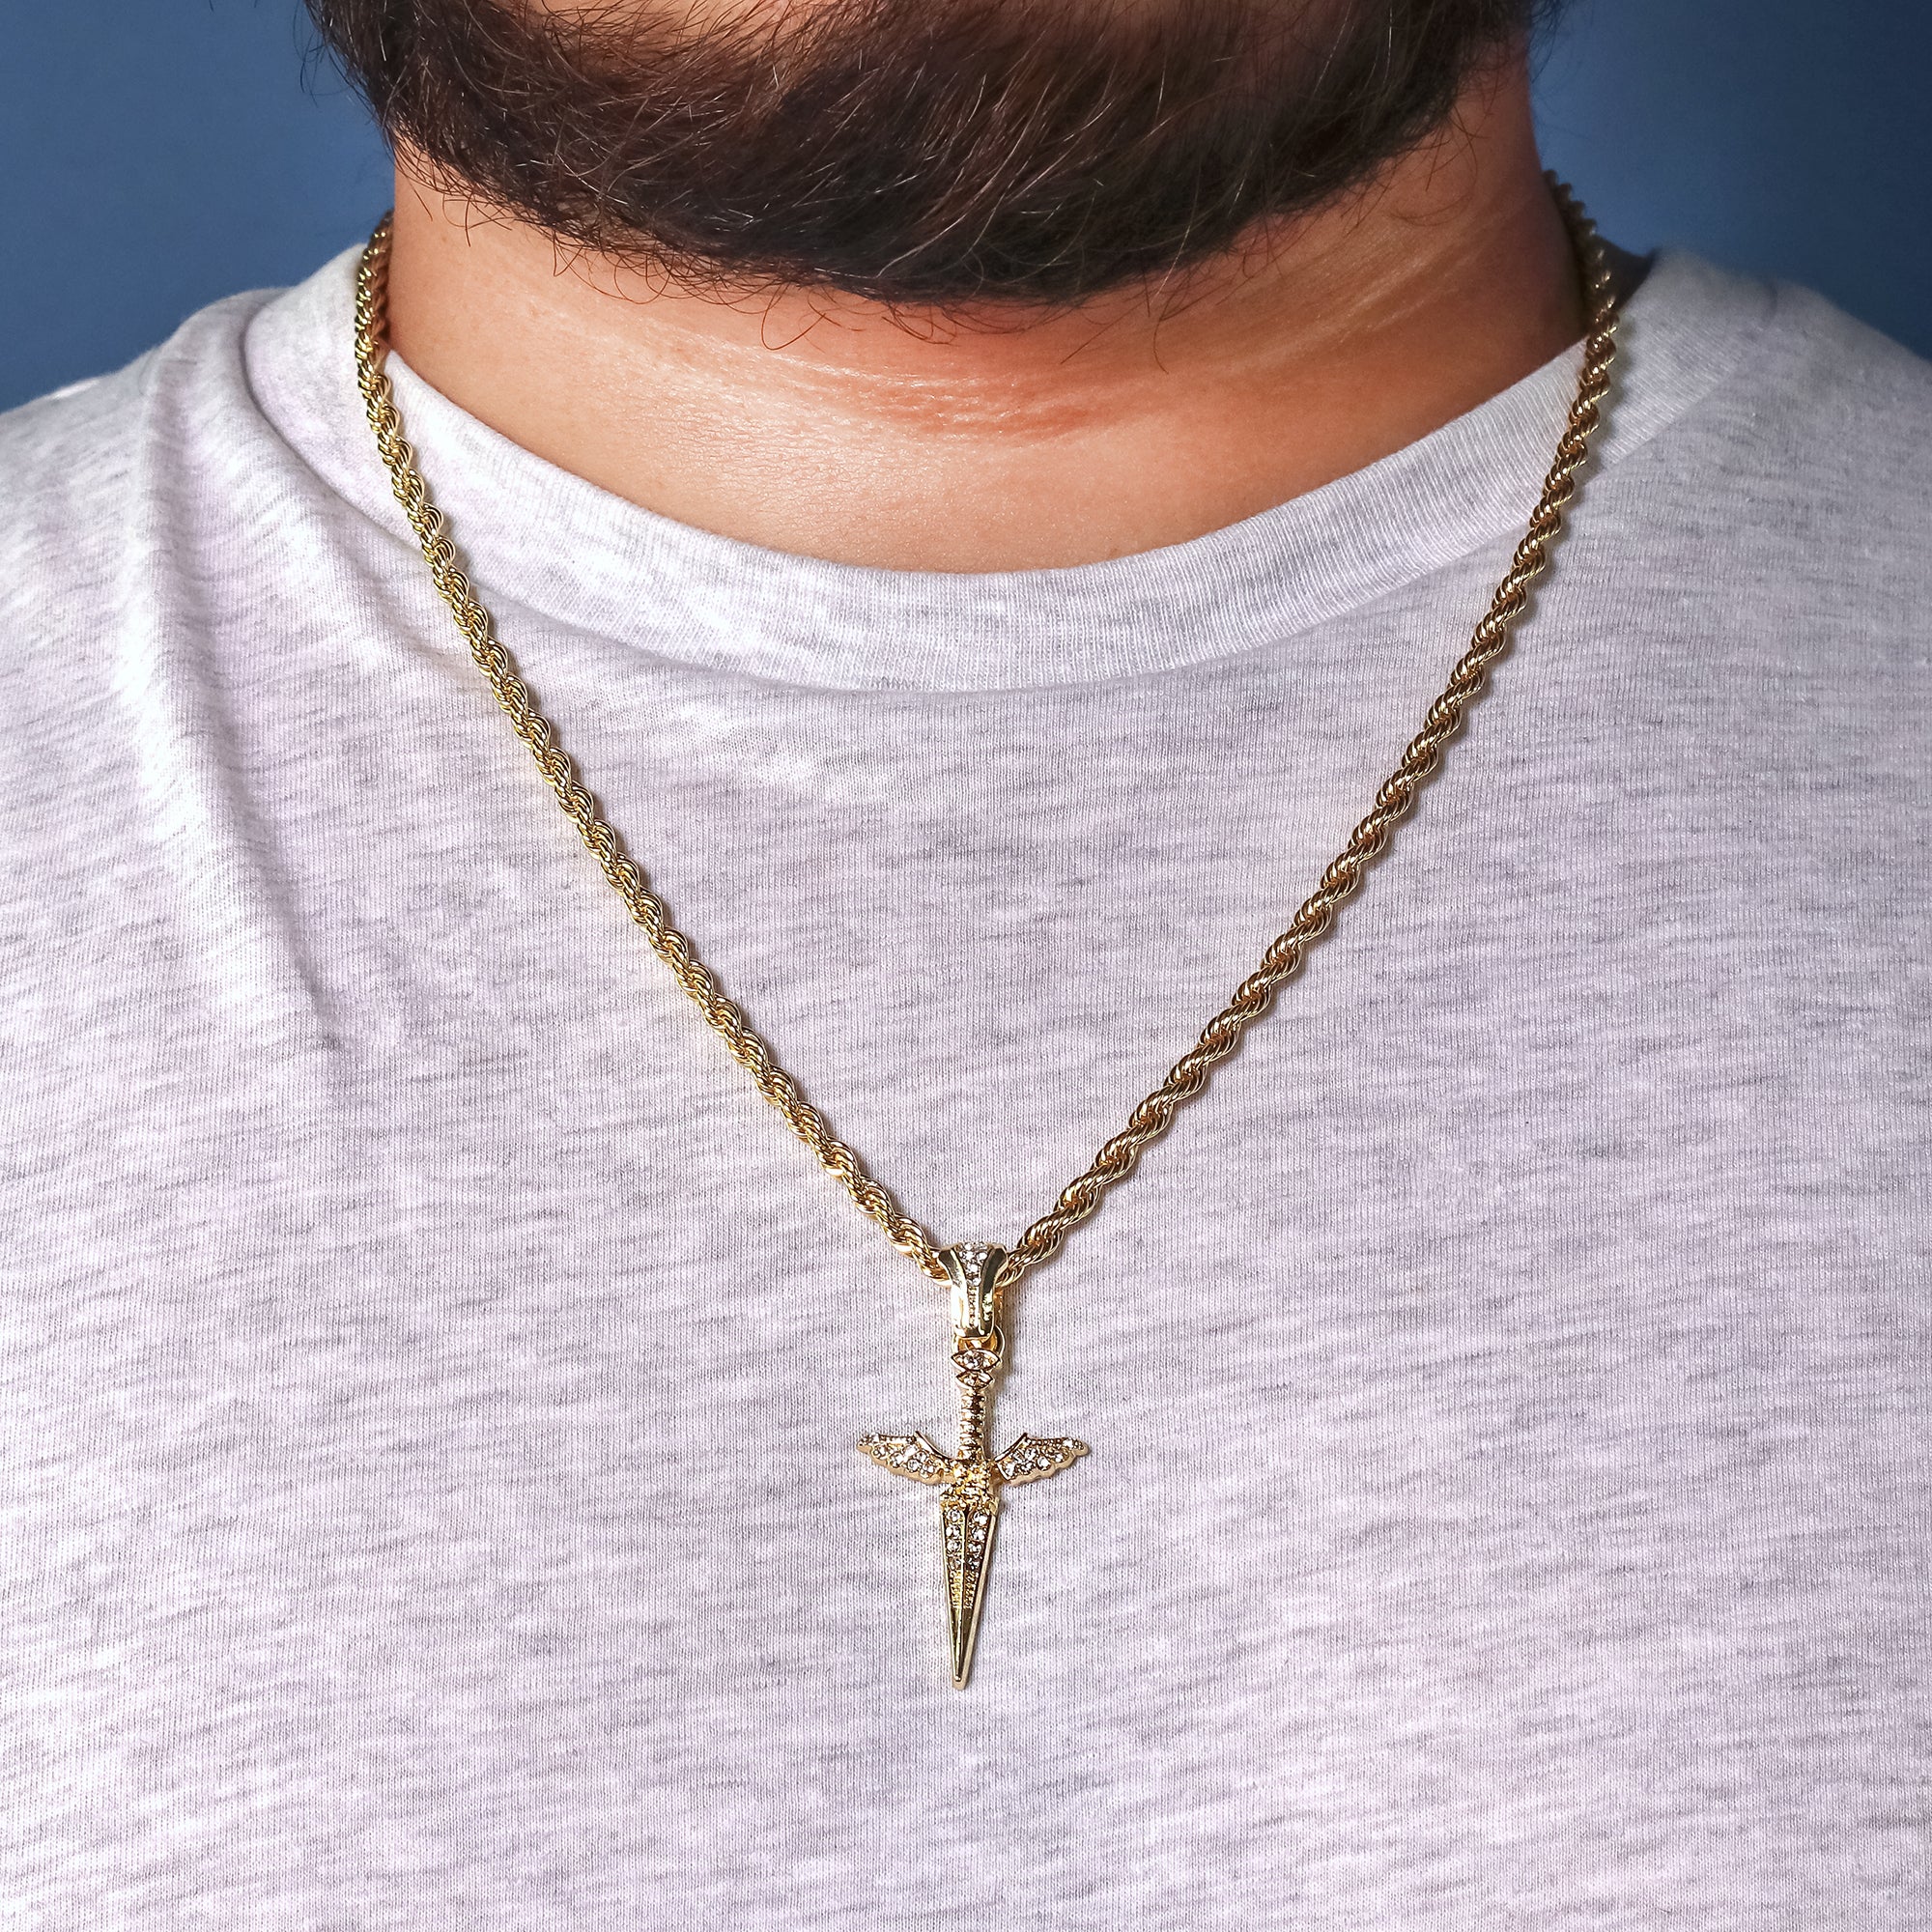 Dagger 21 Pendant 24" Rope Chain Men's 18k Gold Plated Jewelry